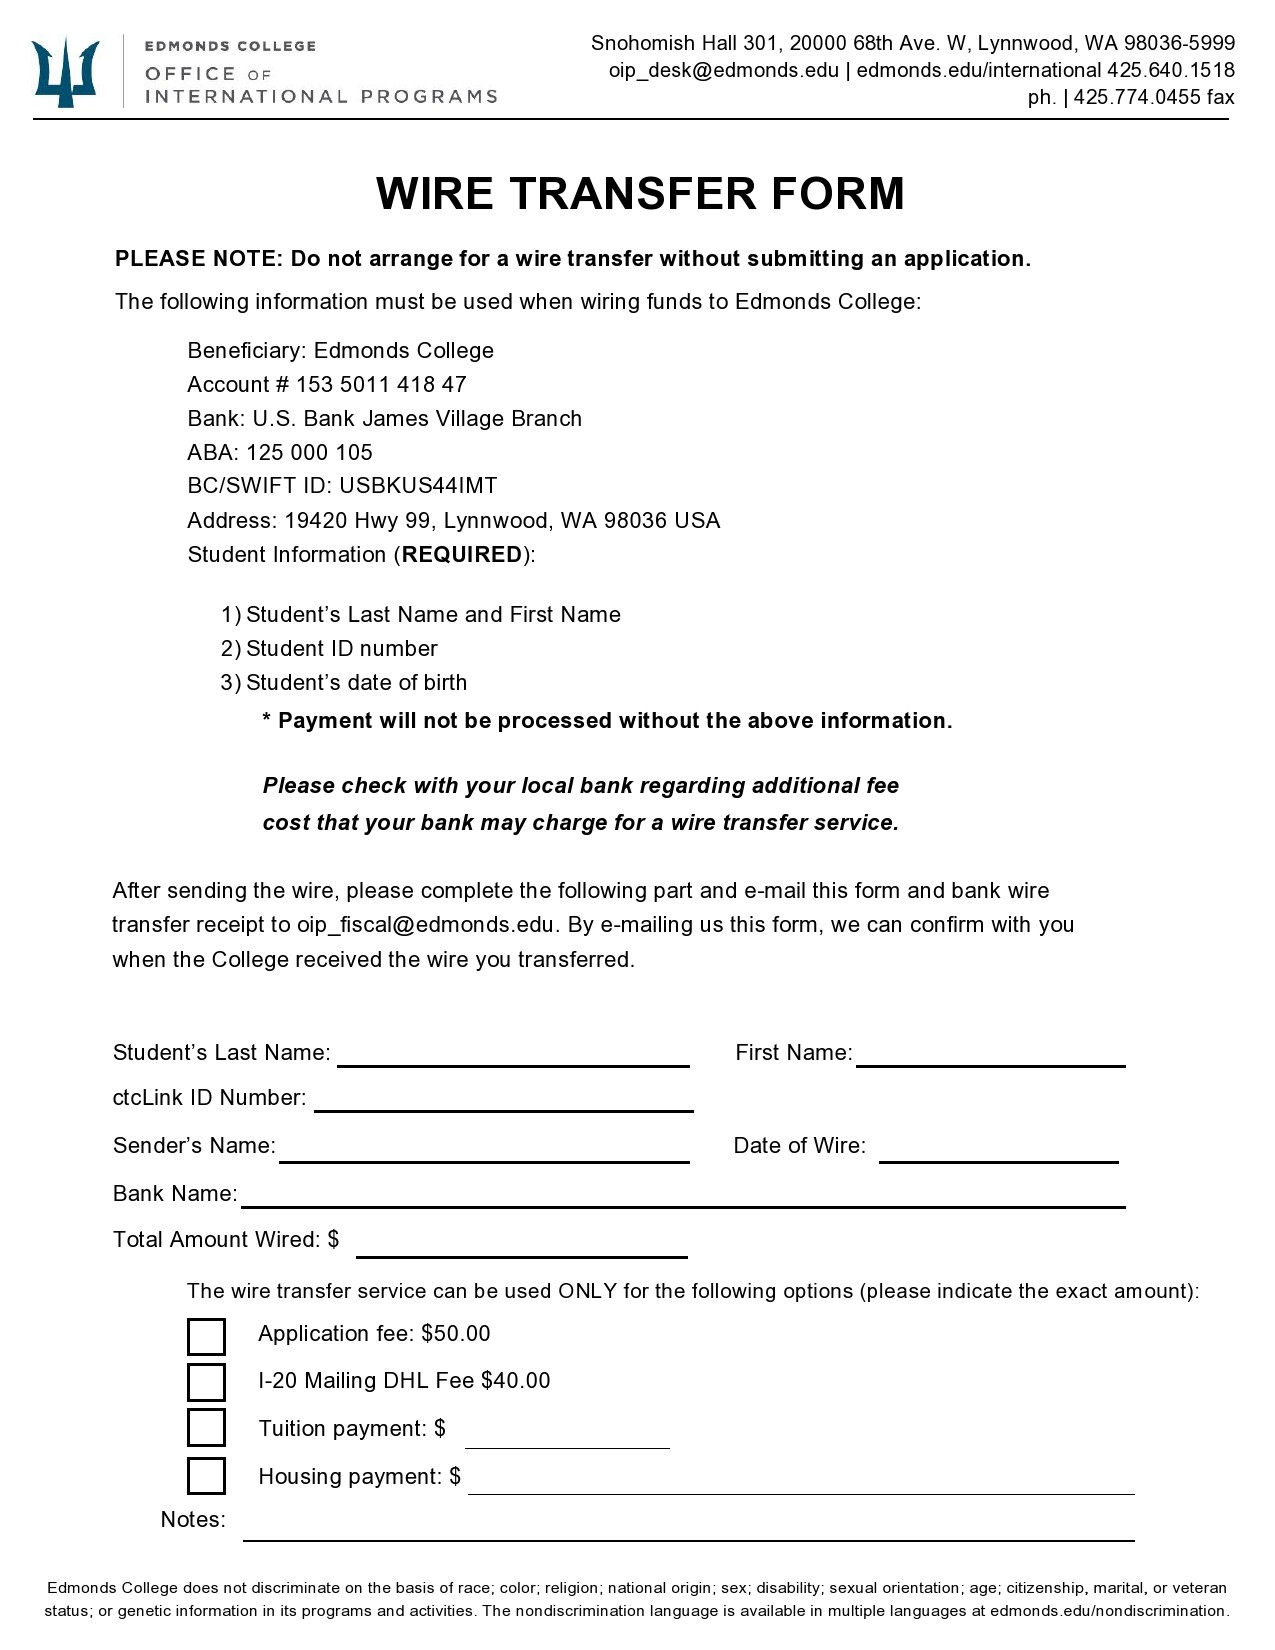 Free wire transfer form 15